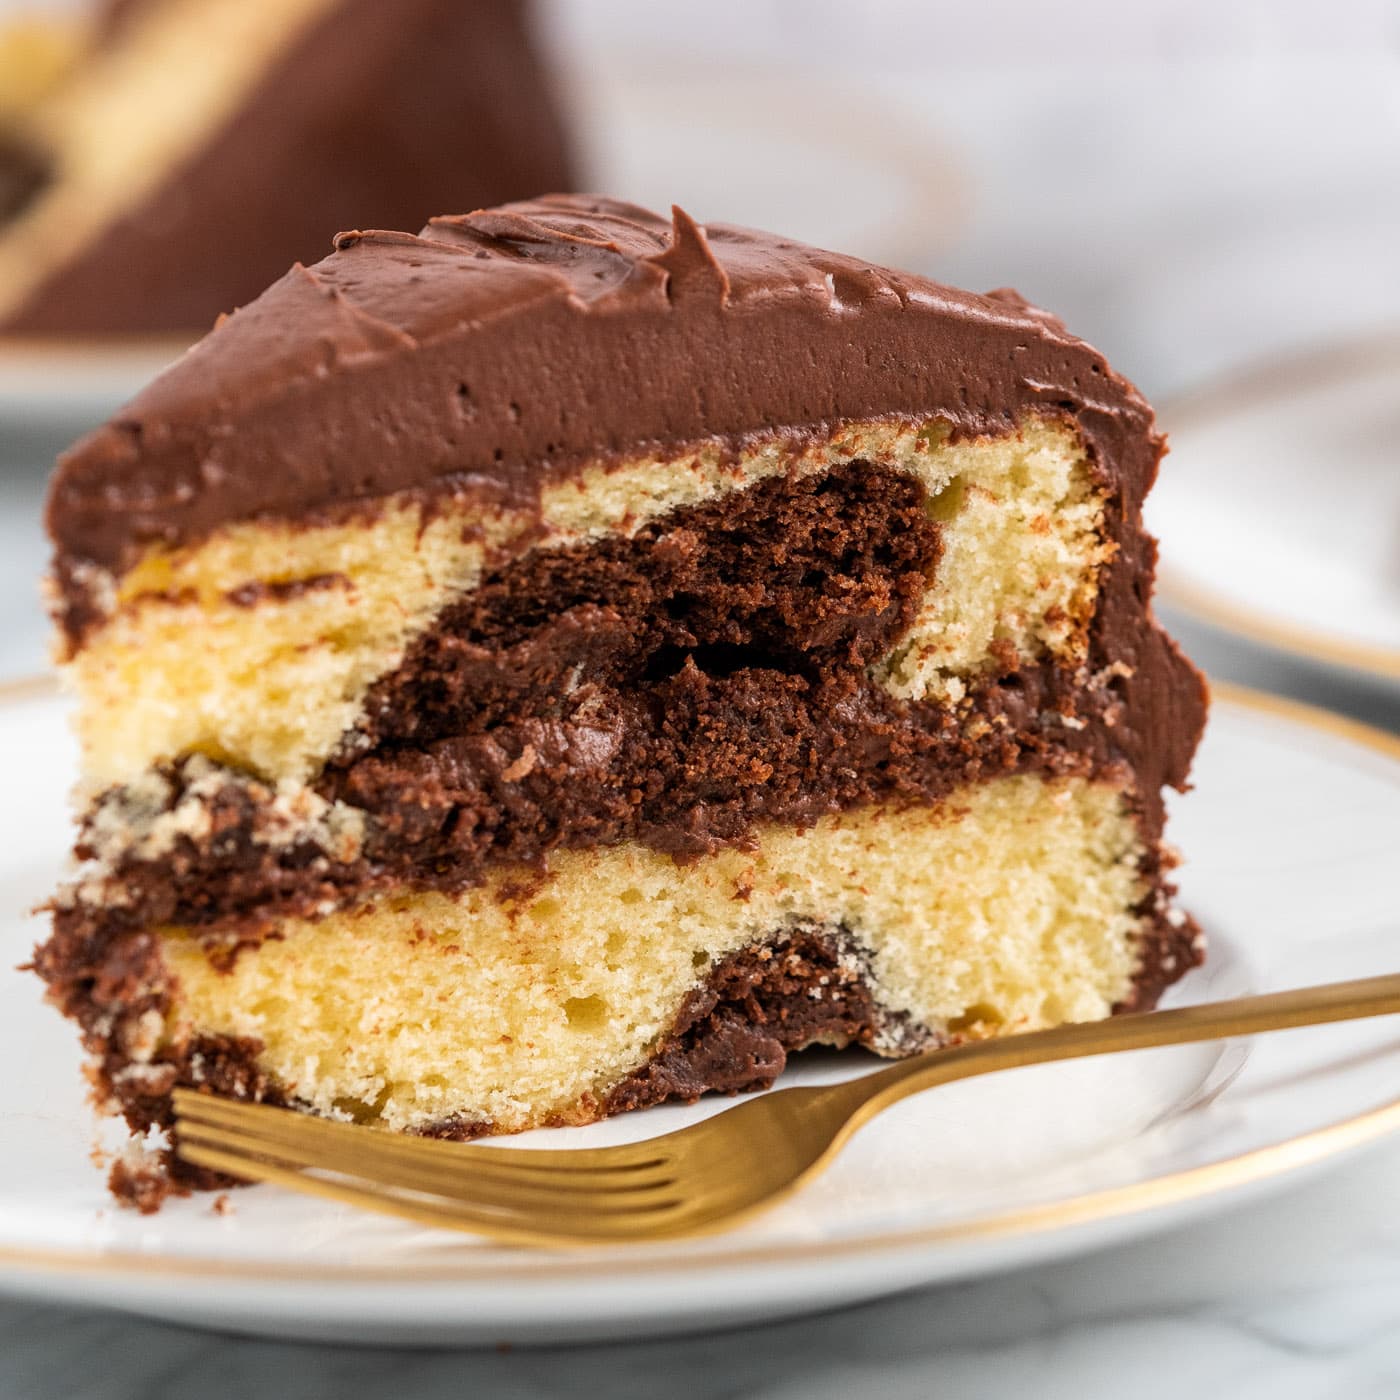 Aggregate more than 57 marble cake images latest - in.daotaonec